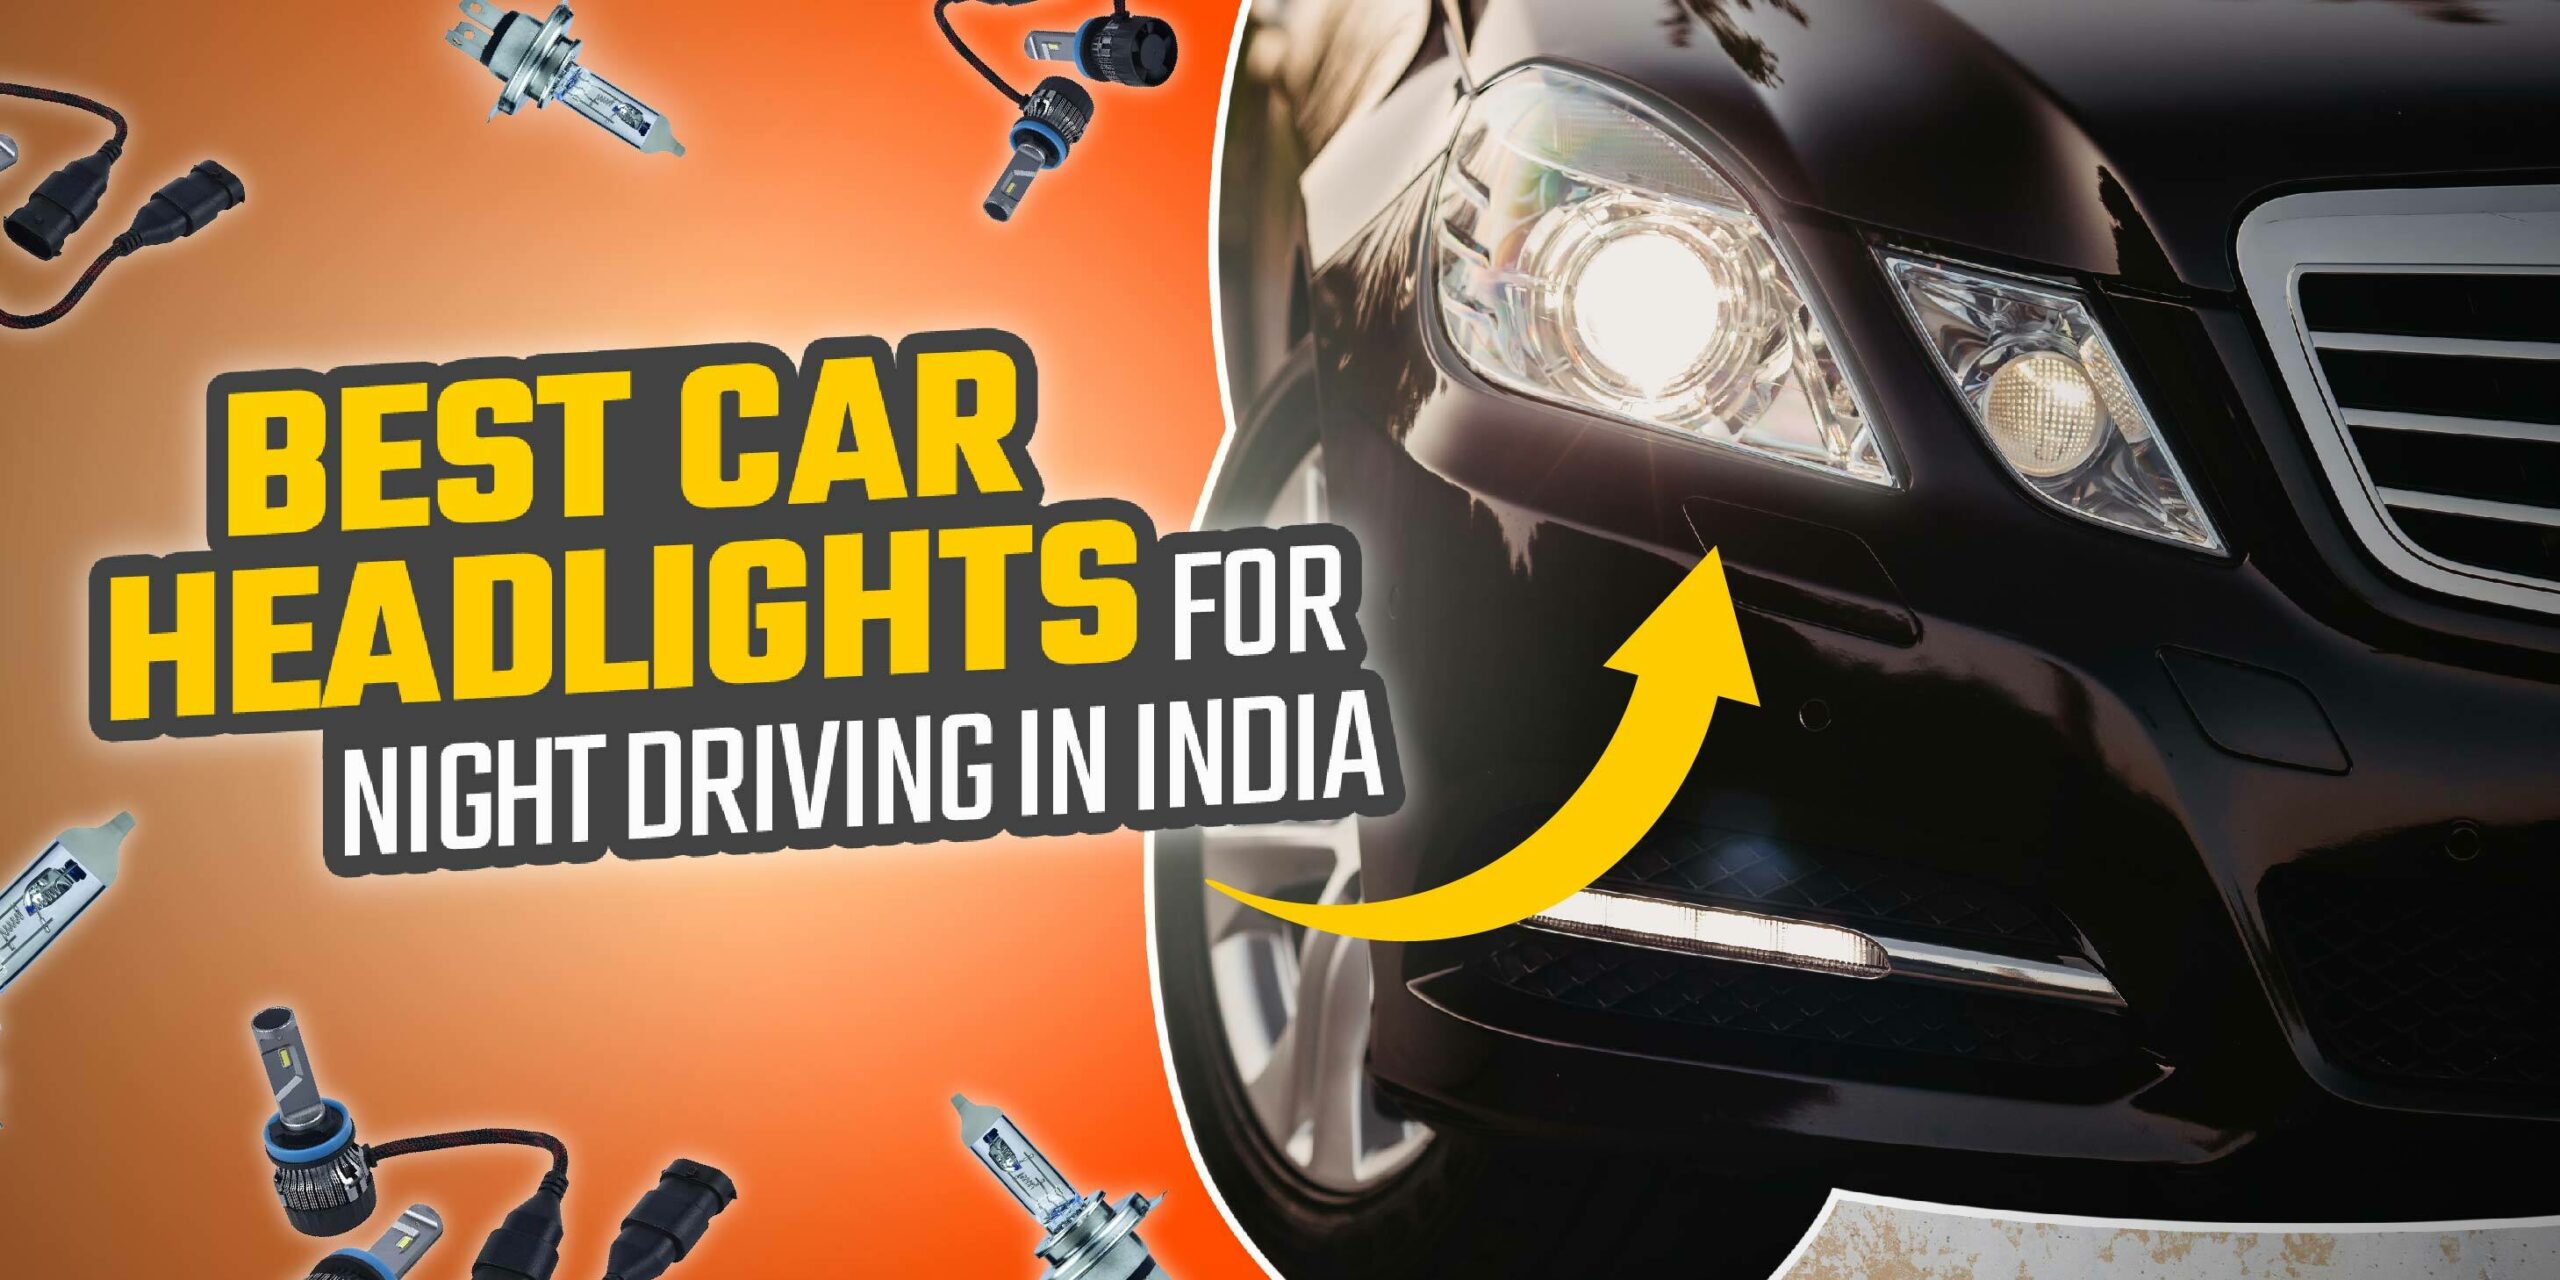 A List Of The Best Car Headlights For Night Driving In India